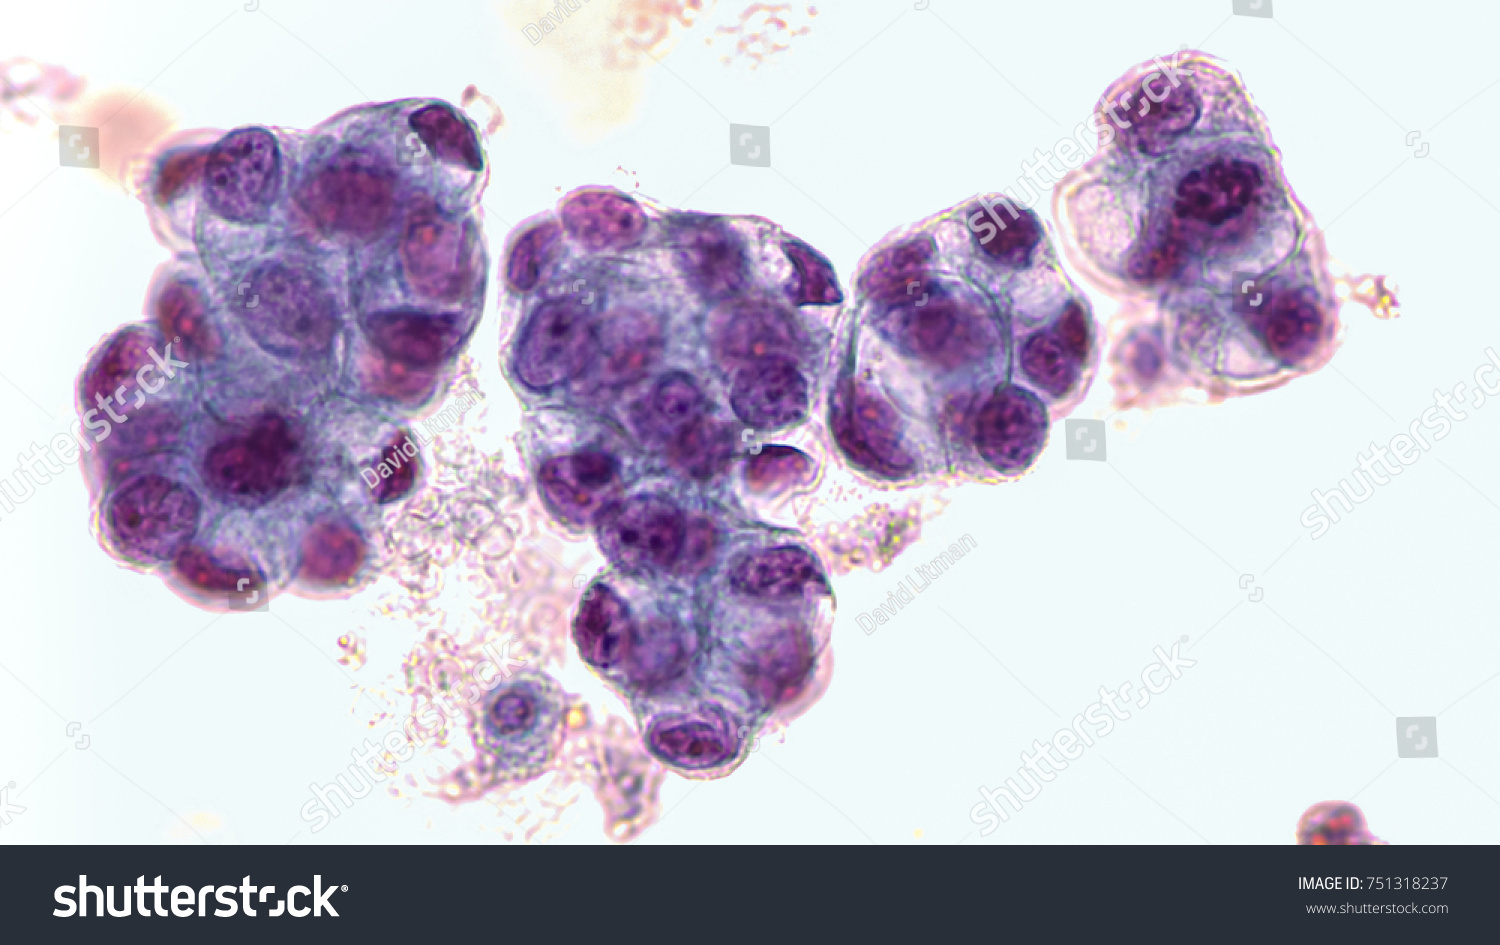 Malignant fluid cytology;   Malignant cells of adenocarcinoma may spread to fluid of  pleural or peritoneal cavity in cancer from the breast,  lung, colon, pancreas, ovary, endometrium or other sites. #751318237